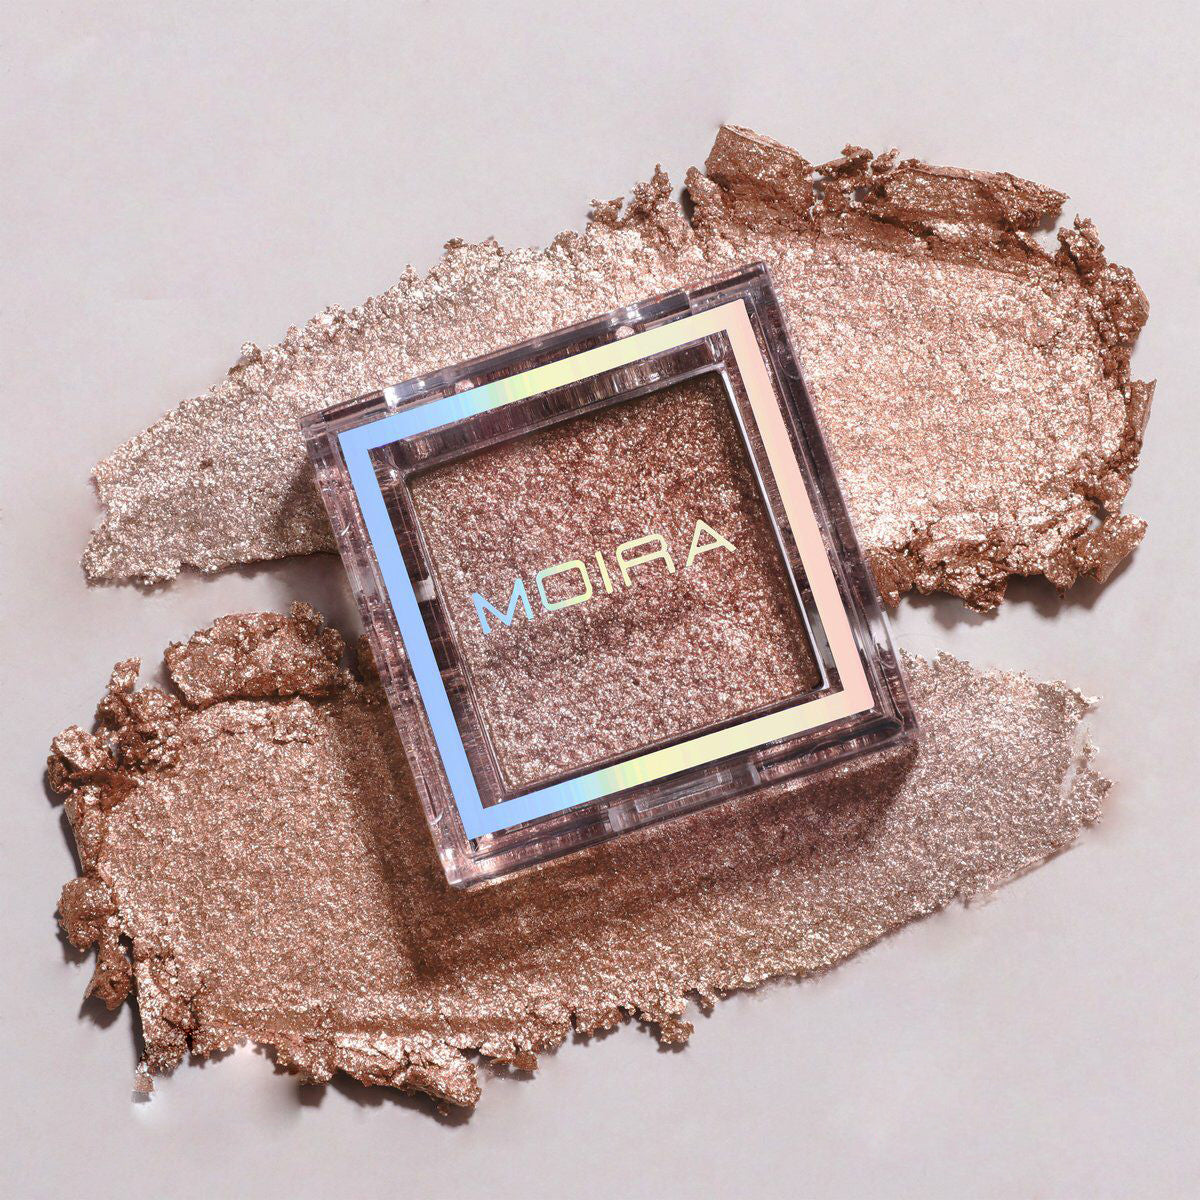 Sombra Individual LUCENT CREAM SHADOW MOIRA